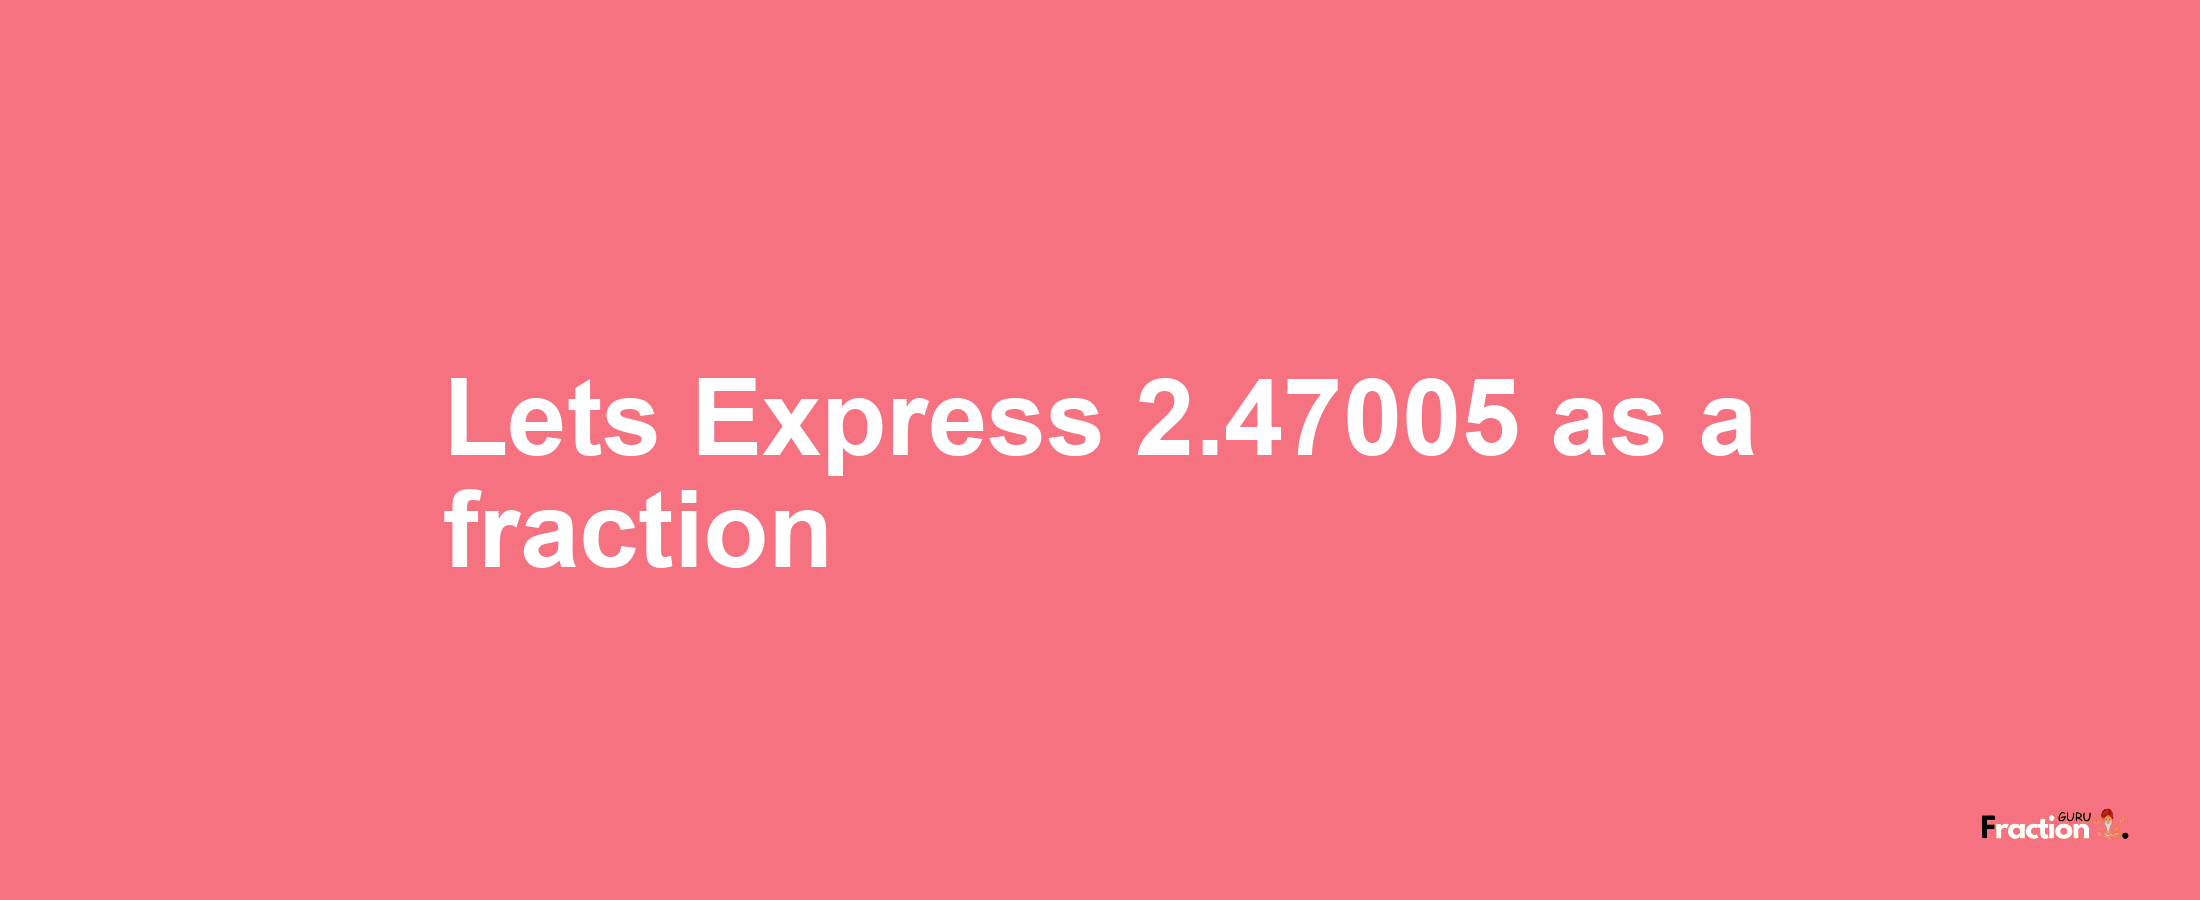 Lets Express 2.47005 as afraction